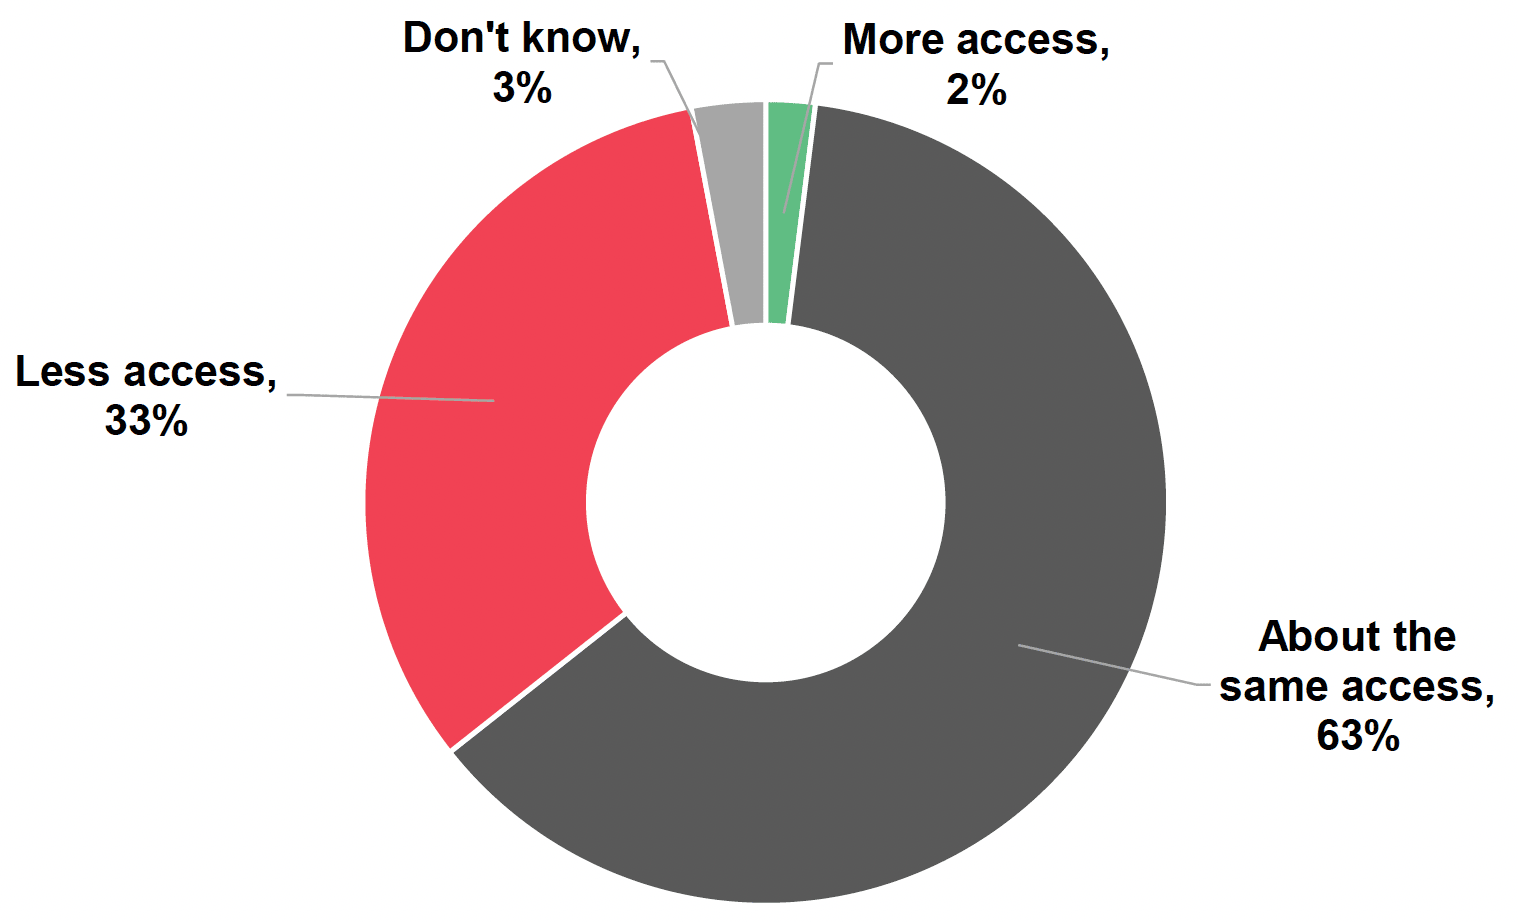 Pie chart showing that 33% have less access than before the pandemic, whilst 63% have about the same